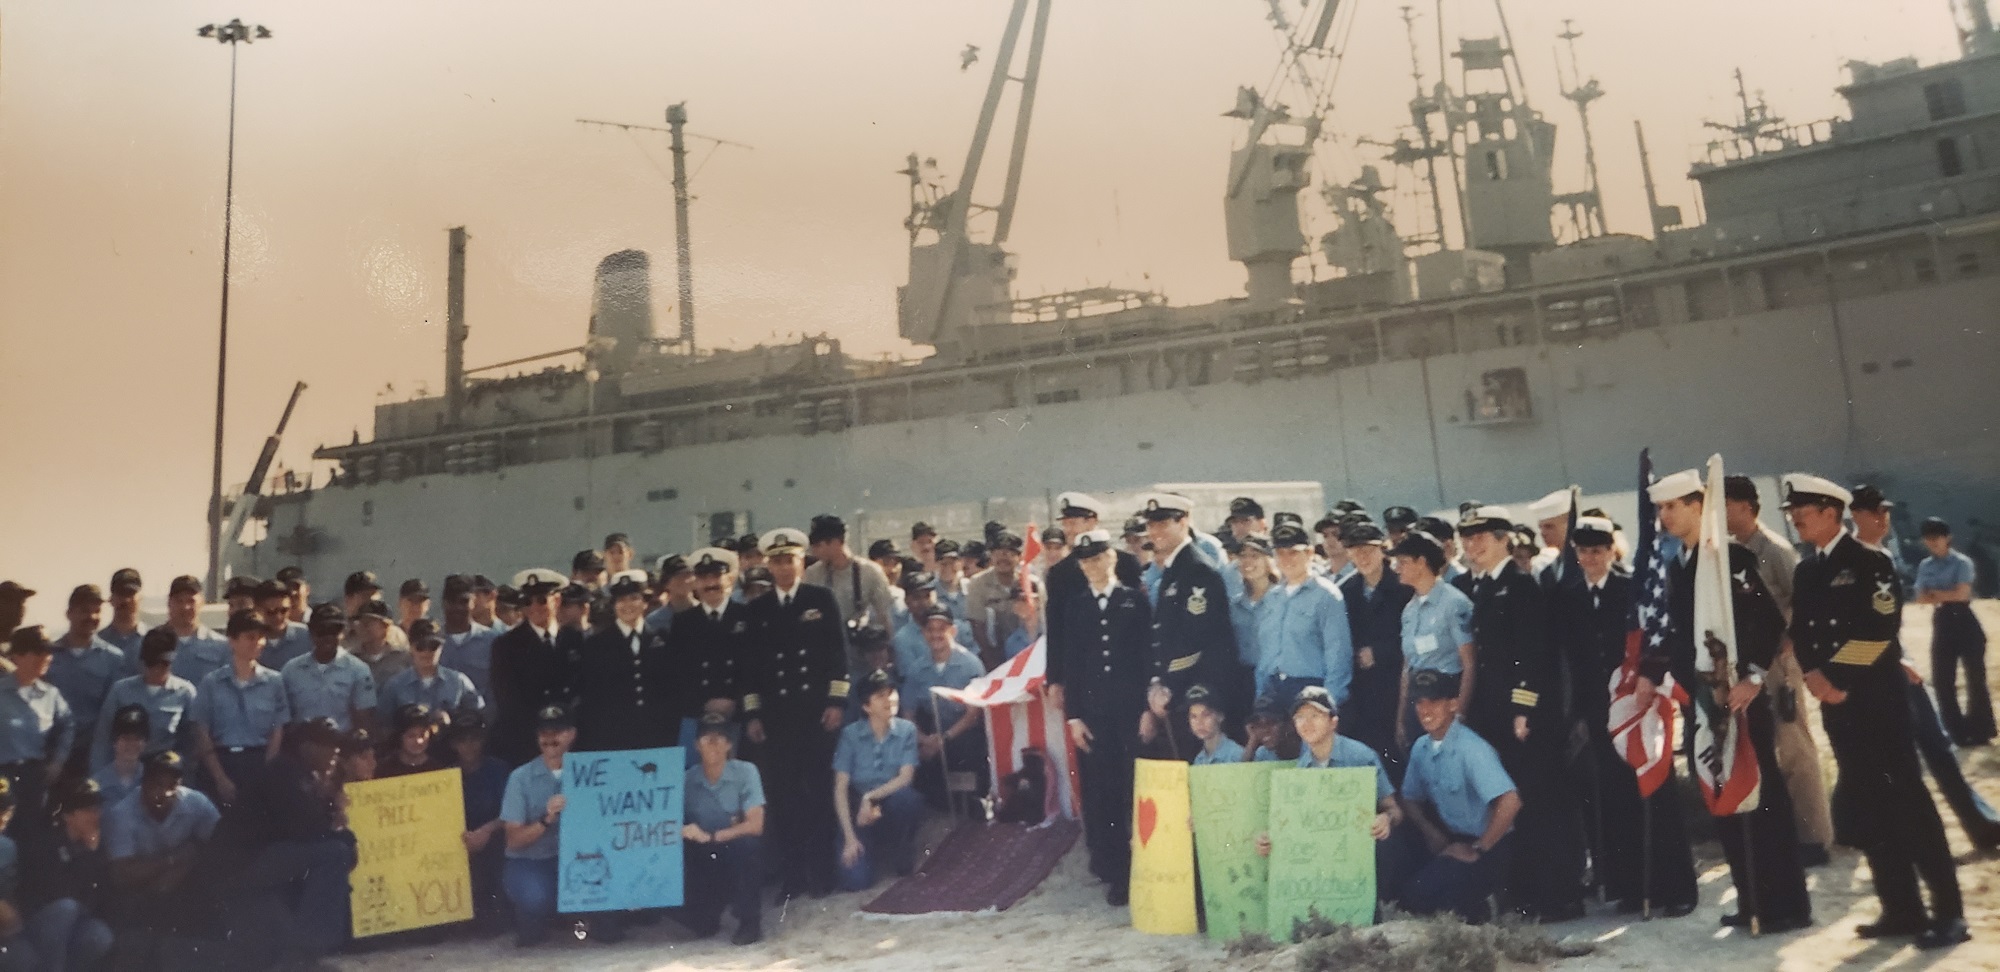 Legal Chief Lorrie McNeal Saylor and her fellow Navy officers next to a ship for a Punxsutawney Phil ceremony in Jebel Ali, United Arab Emirates. (Courtesy of Lorrie McNeal Saylor)